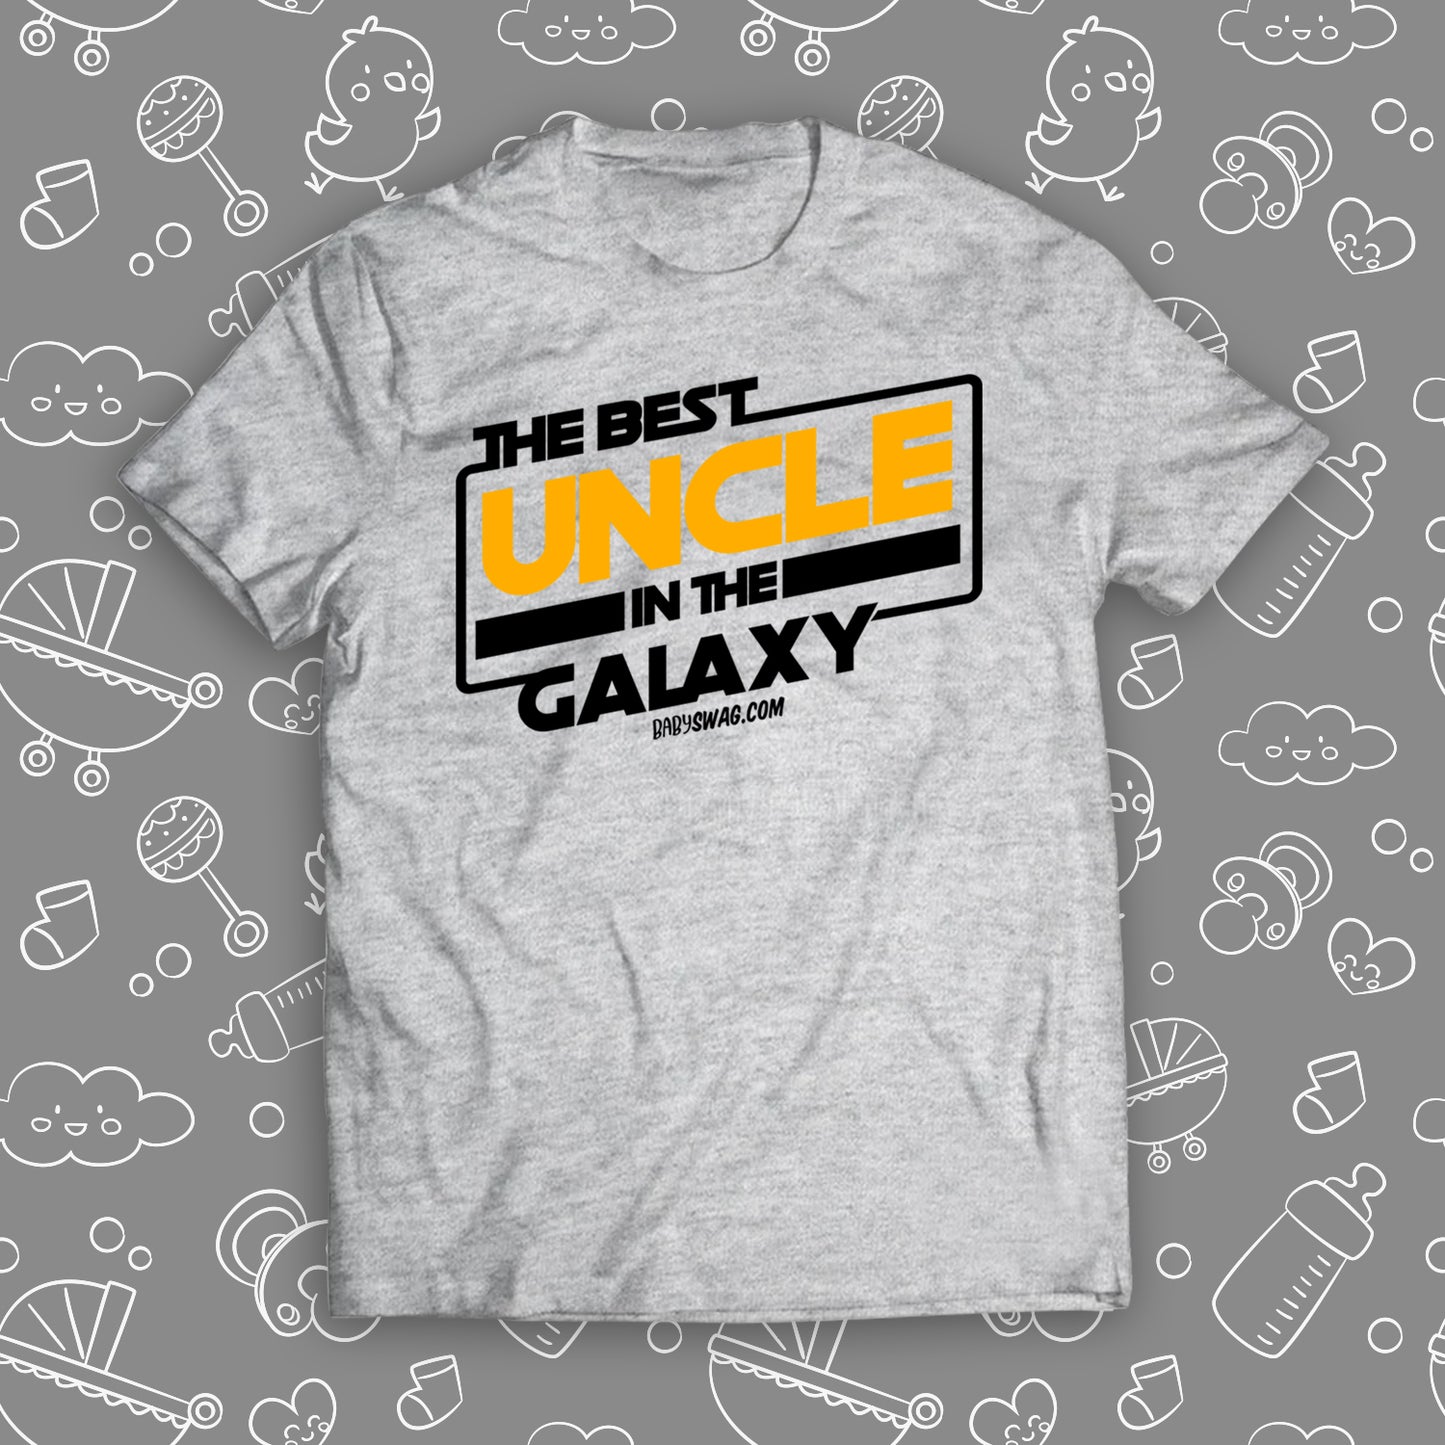 Best Uncle In The Galaxy